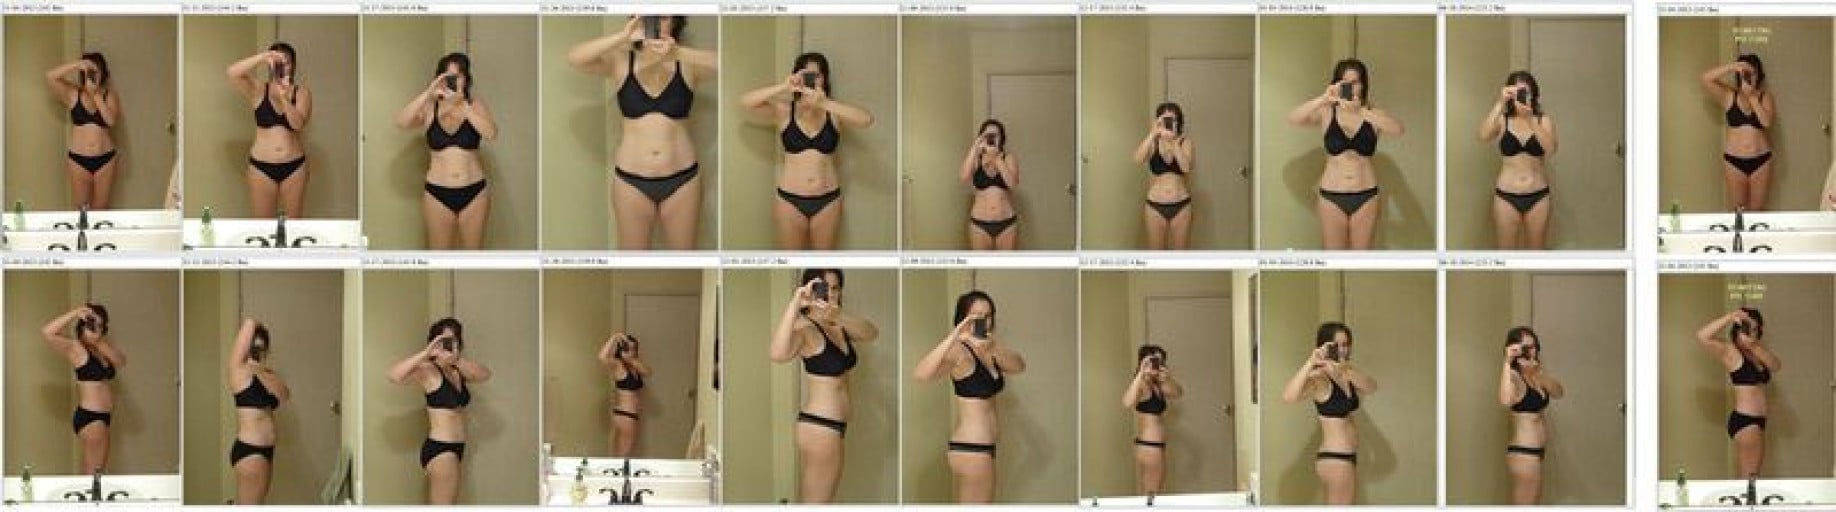 A photo of a 5'4" woman showing a weight cut from 148 pounds to 123 pounds. A net loss of 25 pounds.